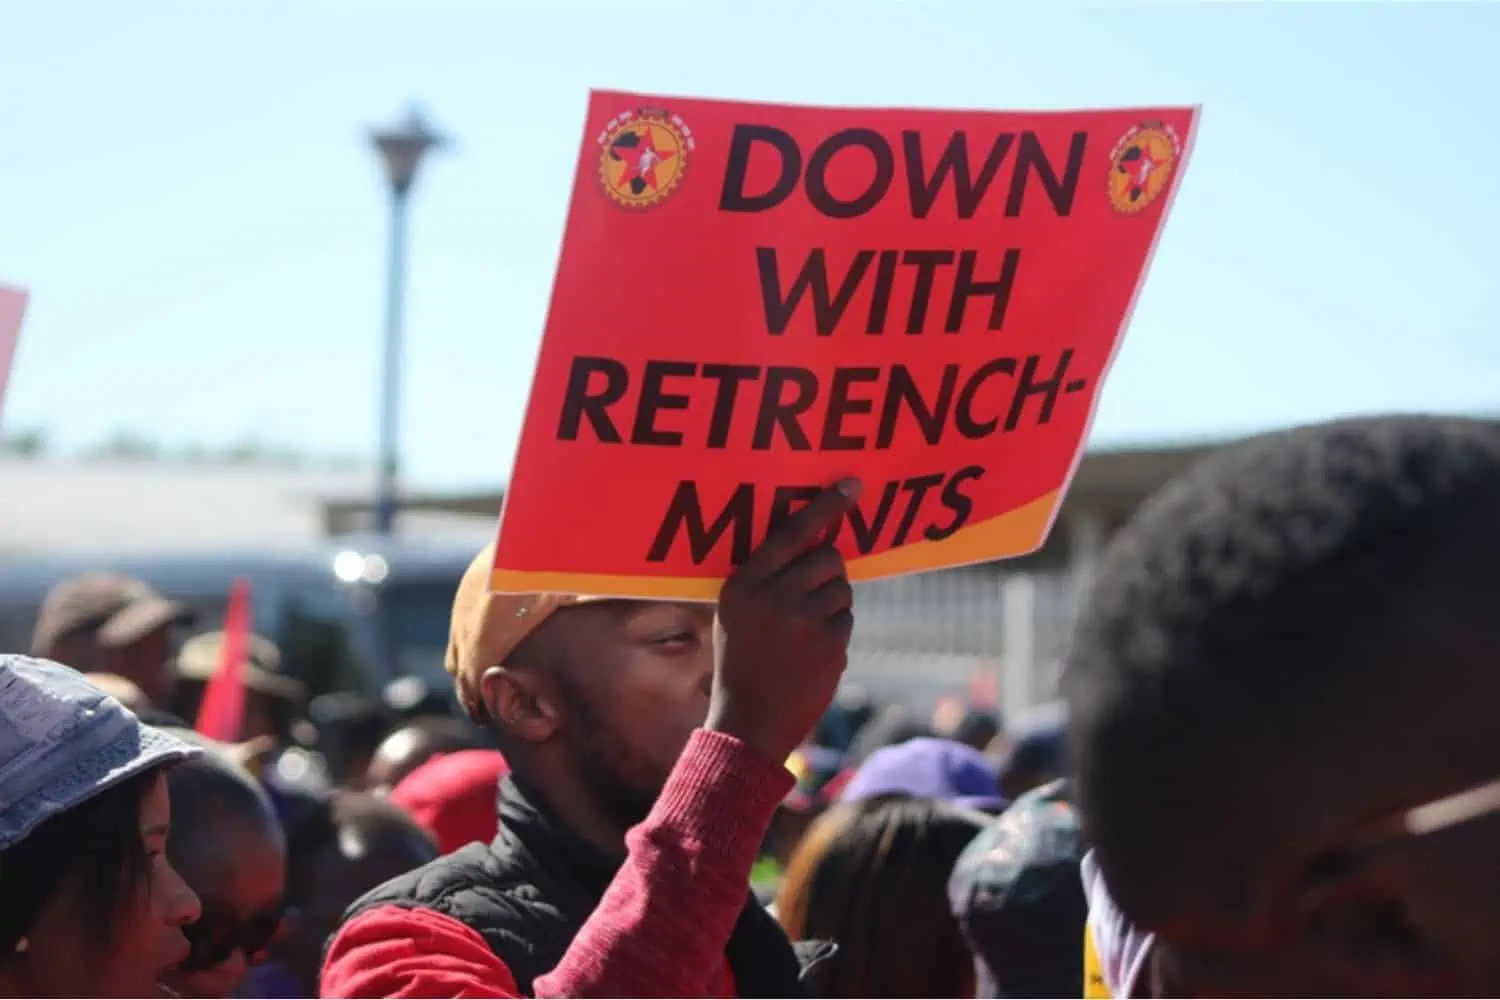 TODAY: South Africa's Top News for 1 March 2022 - Unions' public wages dispute far from over